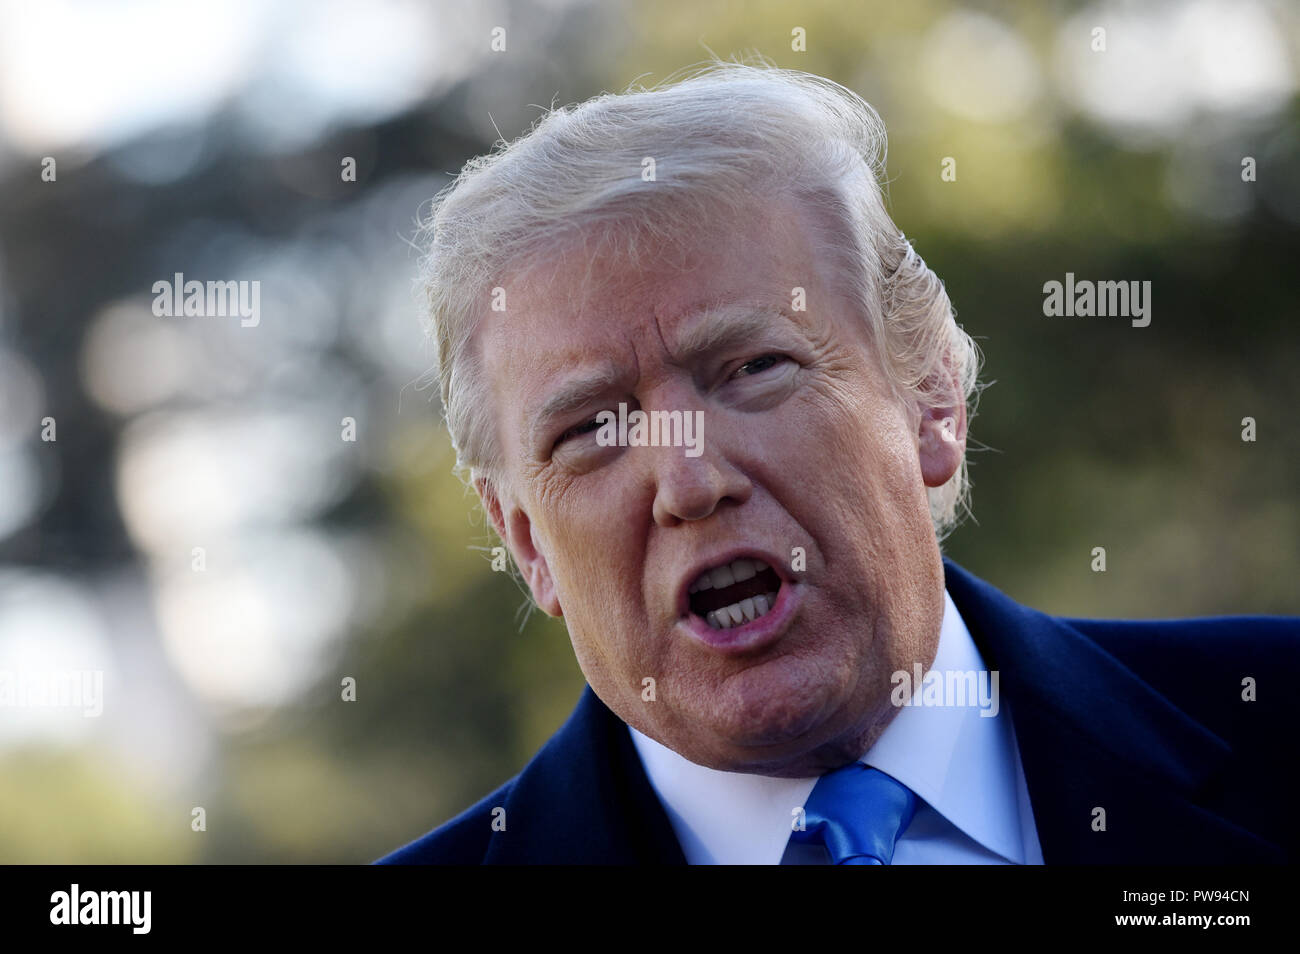 U.S. President Donald Trump speaks to reporters on the South Lawn before boarding Marine One at the White House, on October 13, 2018 in Washington, DC. President Trump is traveling to Kentucky. Credit: Olivier Douliery/Pool via CNP/MediaPunch Stock Photo